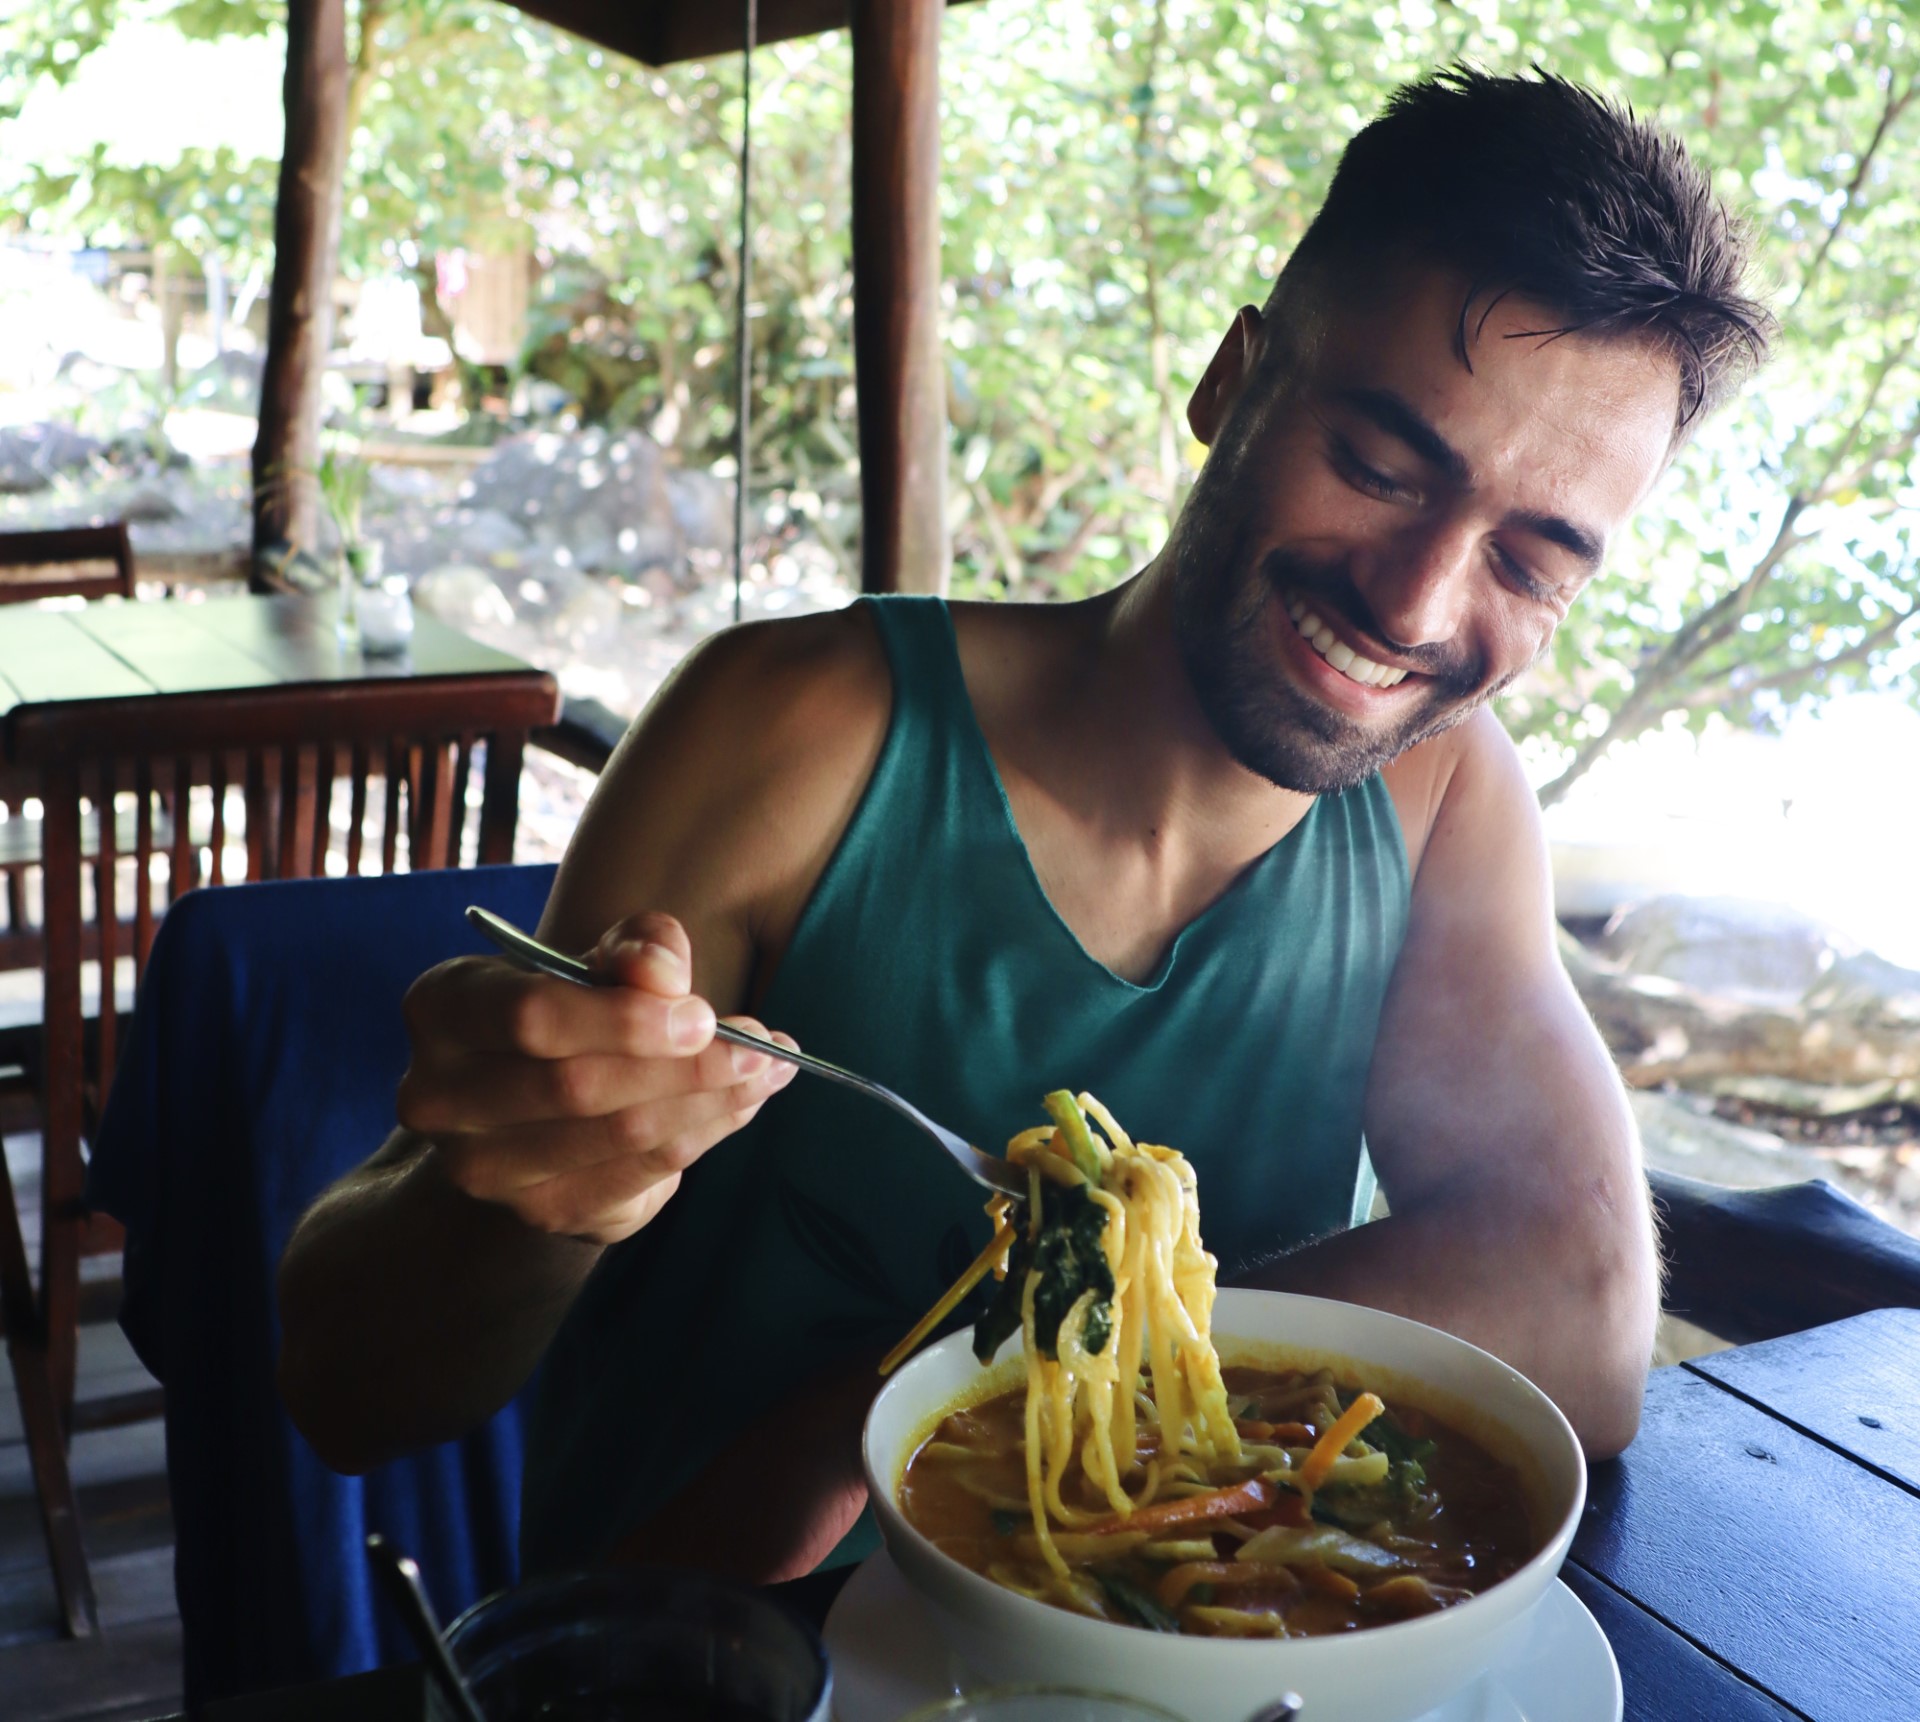 The smile on my face at literally every meal at Keranji Beach